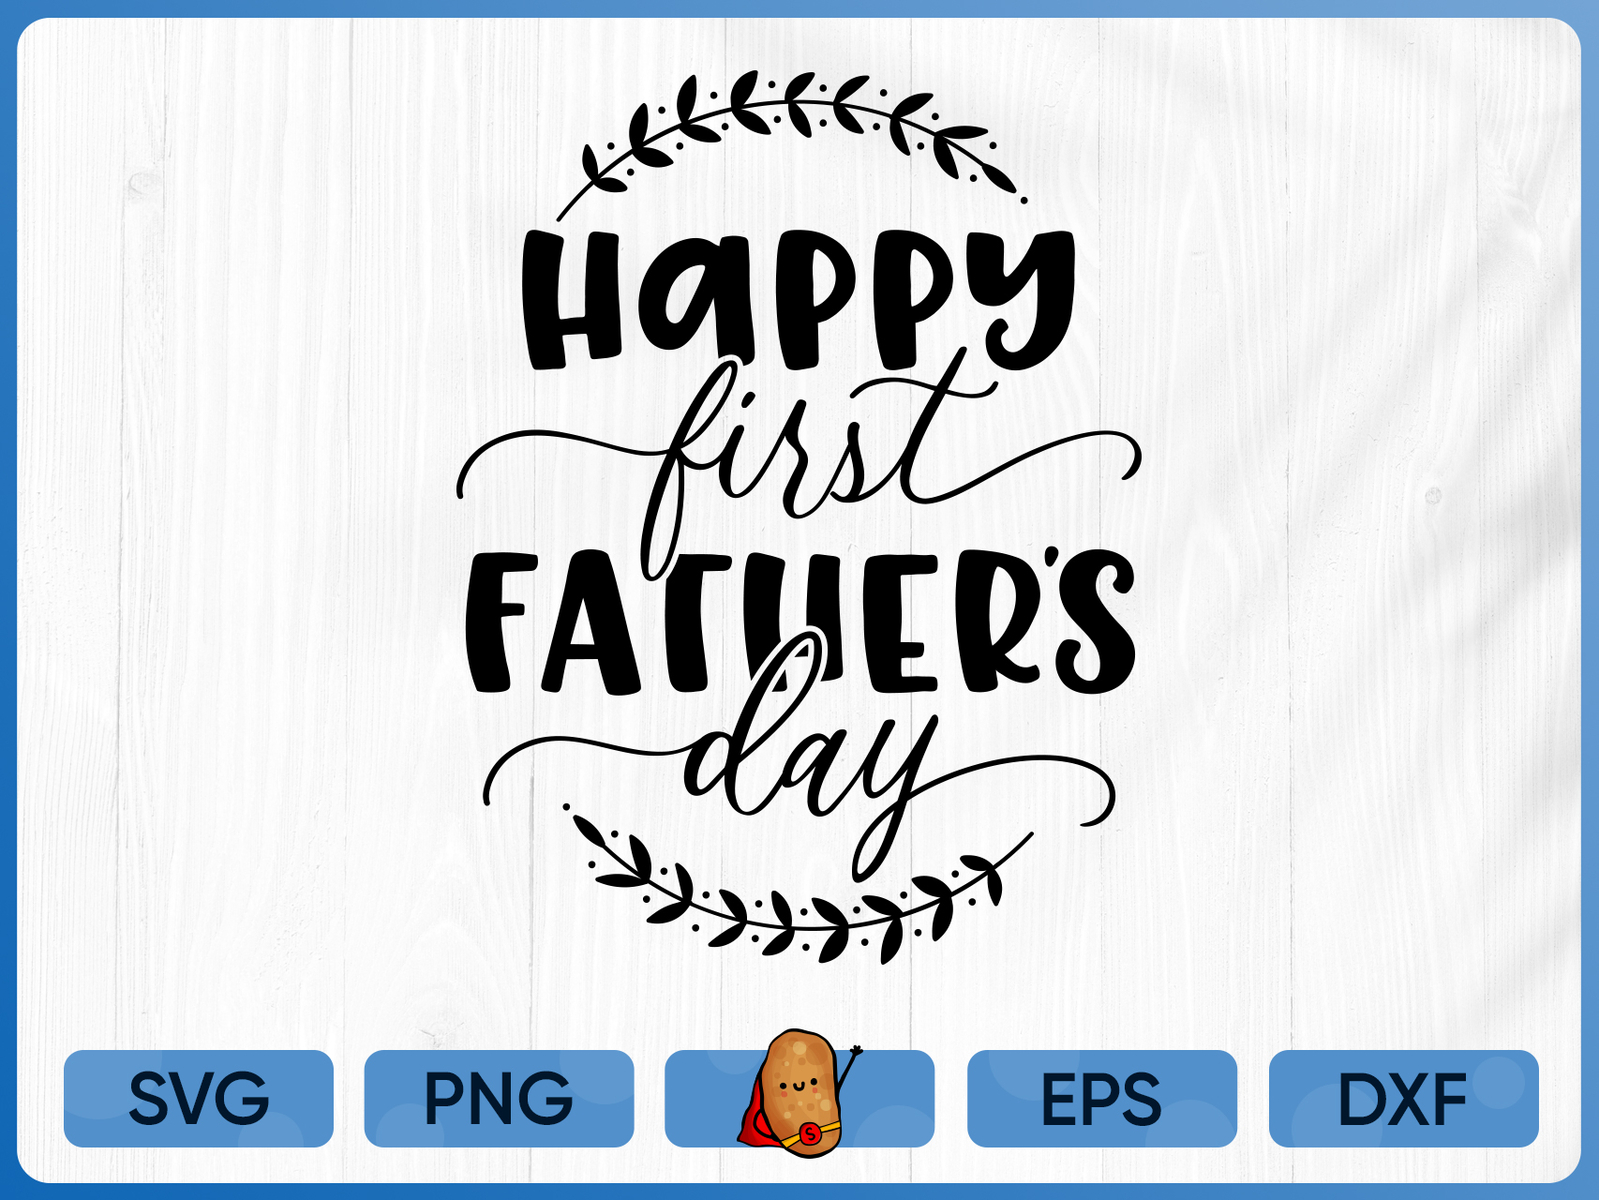 Download T Shirt Design Happy First Fathers Day Baby Design By Superpotatodesigns On Dribbble